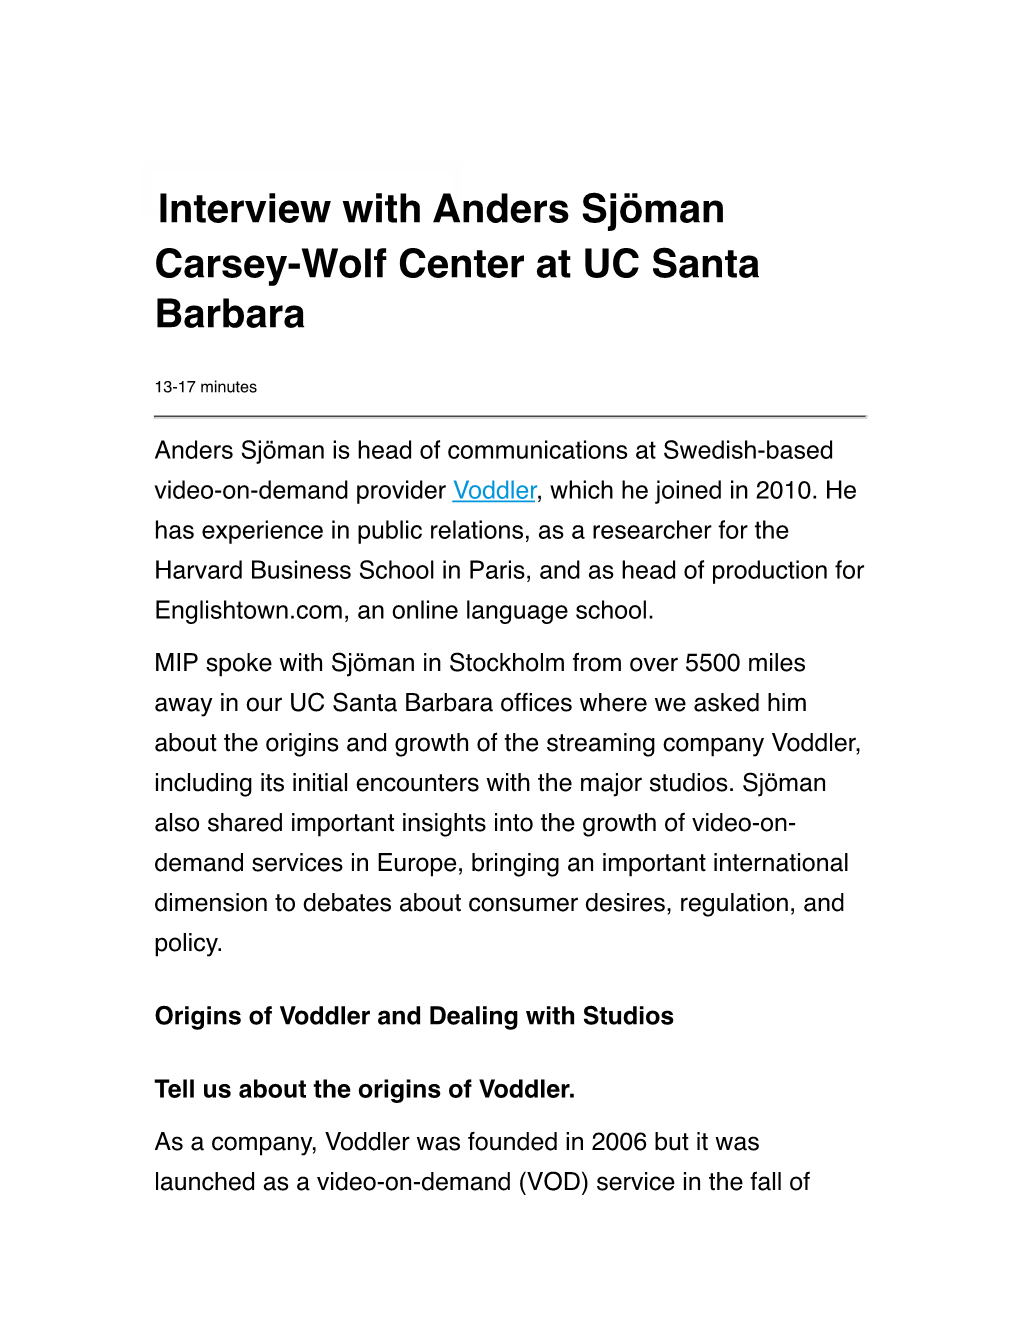 Anders Sjöman Is Head of Communications at Swedish-Based Video-On-Demand Provider Voddler, Which He Joined in 2010